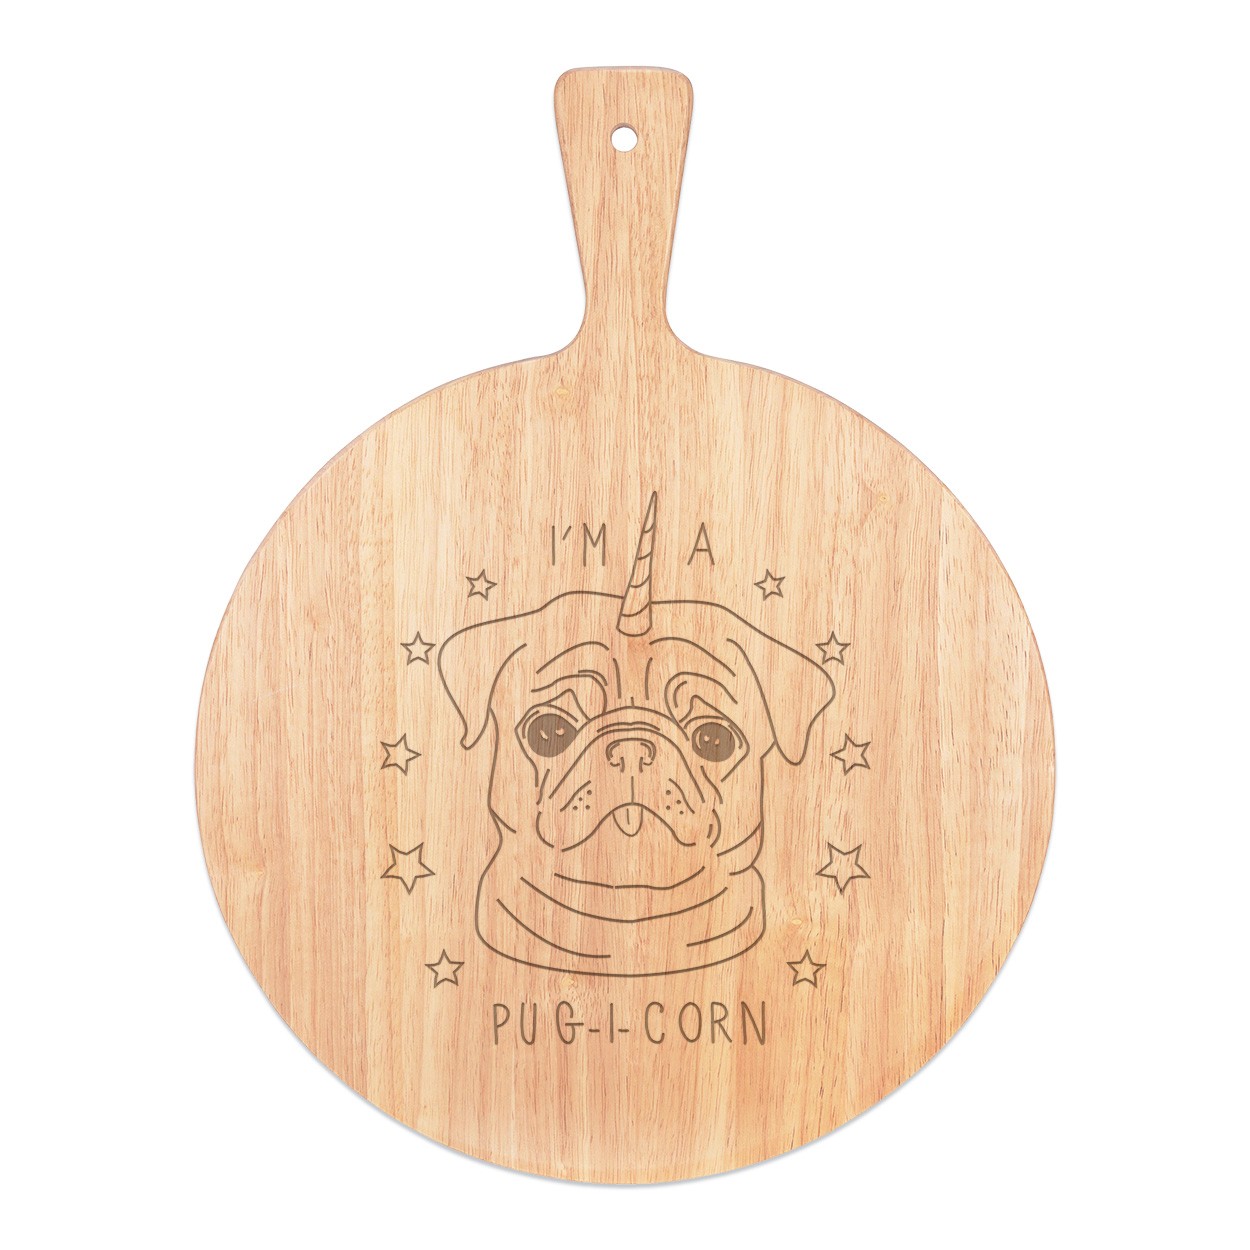 I'm A Pugicorn Stars Pizza Board Paddle Serving Tray Handle Round Wooden 45x34cm